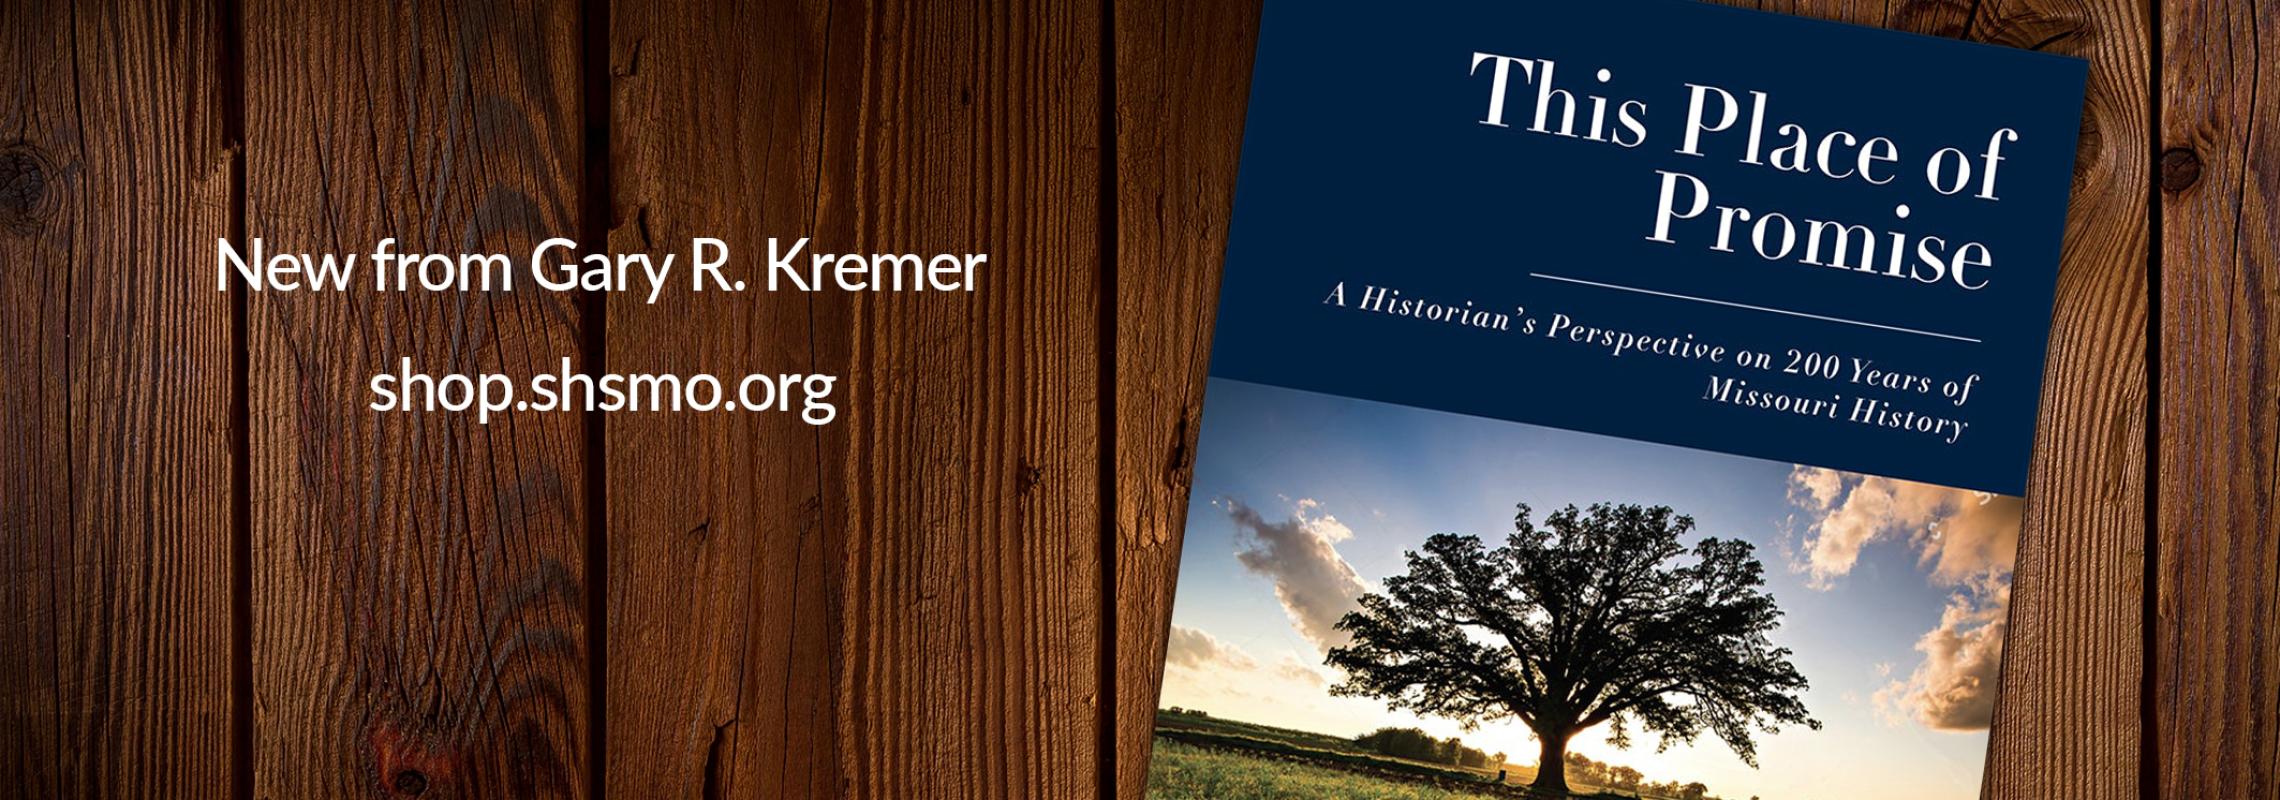 Says "New from Gary R. Kremer shop.shsmo.org" with book cover of "This Place of Promise" by Gary R. Kremer